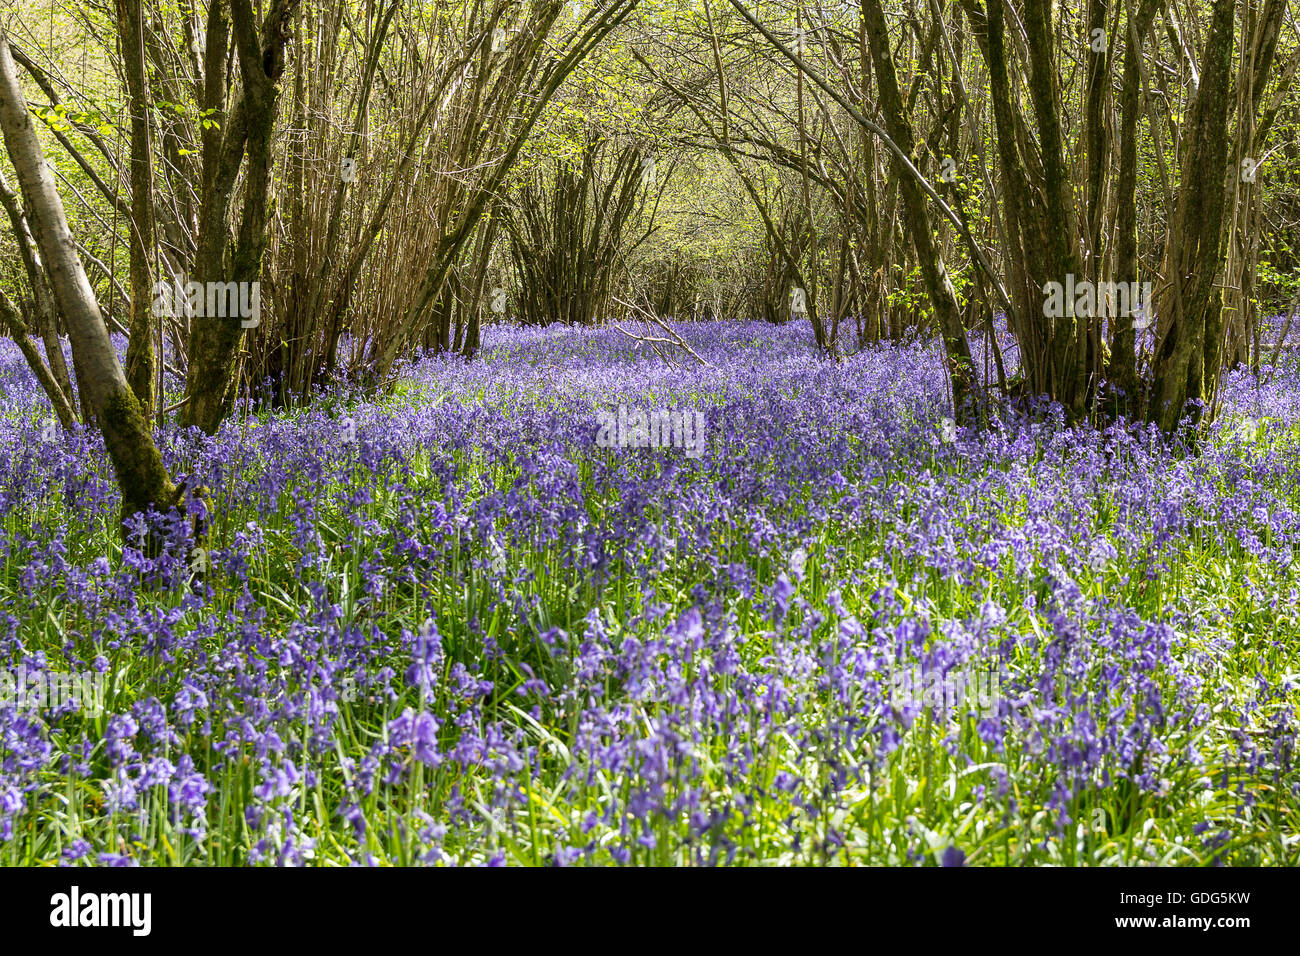 Blue bells hyacinthoides non scripta covers woodland under growth far and wide with blue and green carpet of bell shaped flowers basal narrow leaves Stock Photo